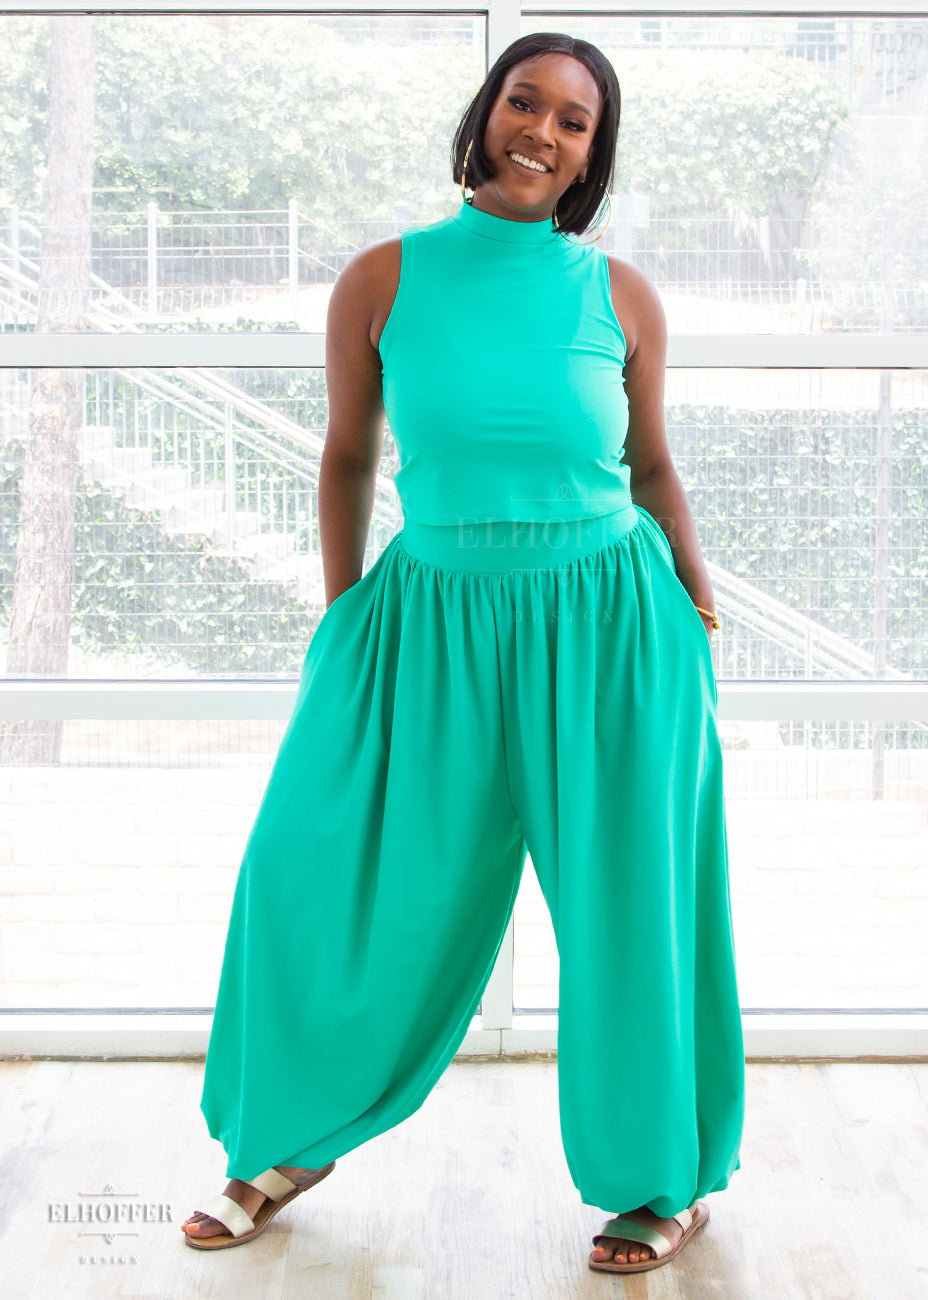 Lynsi models the mock turtle neck sleeveless mint green crop top with matching harem style long pants with a fitted waistband and cuffs and flowy fabric.